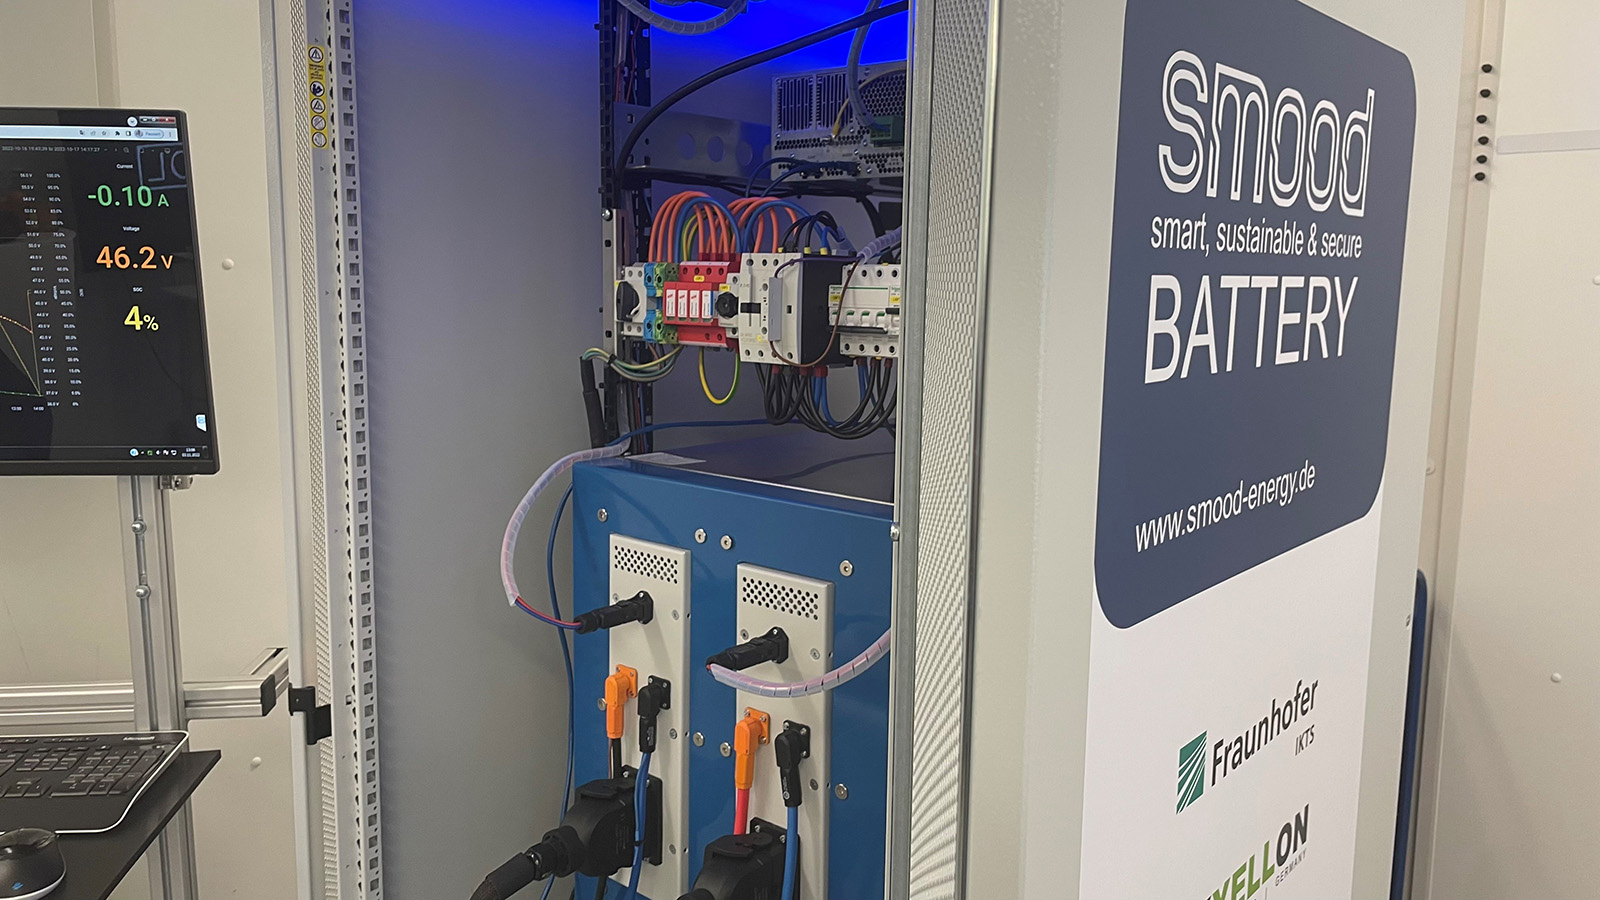 The sodium-nickel chloride battery developed together with Fraunhofer IKTS in the EStorage joint research project will provide a sustainable, safe and inexpensive solution for energy storage.